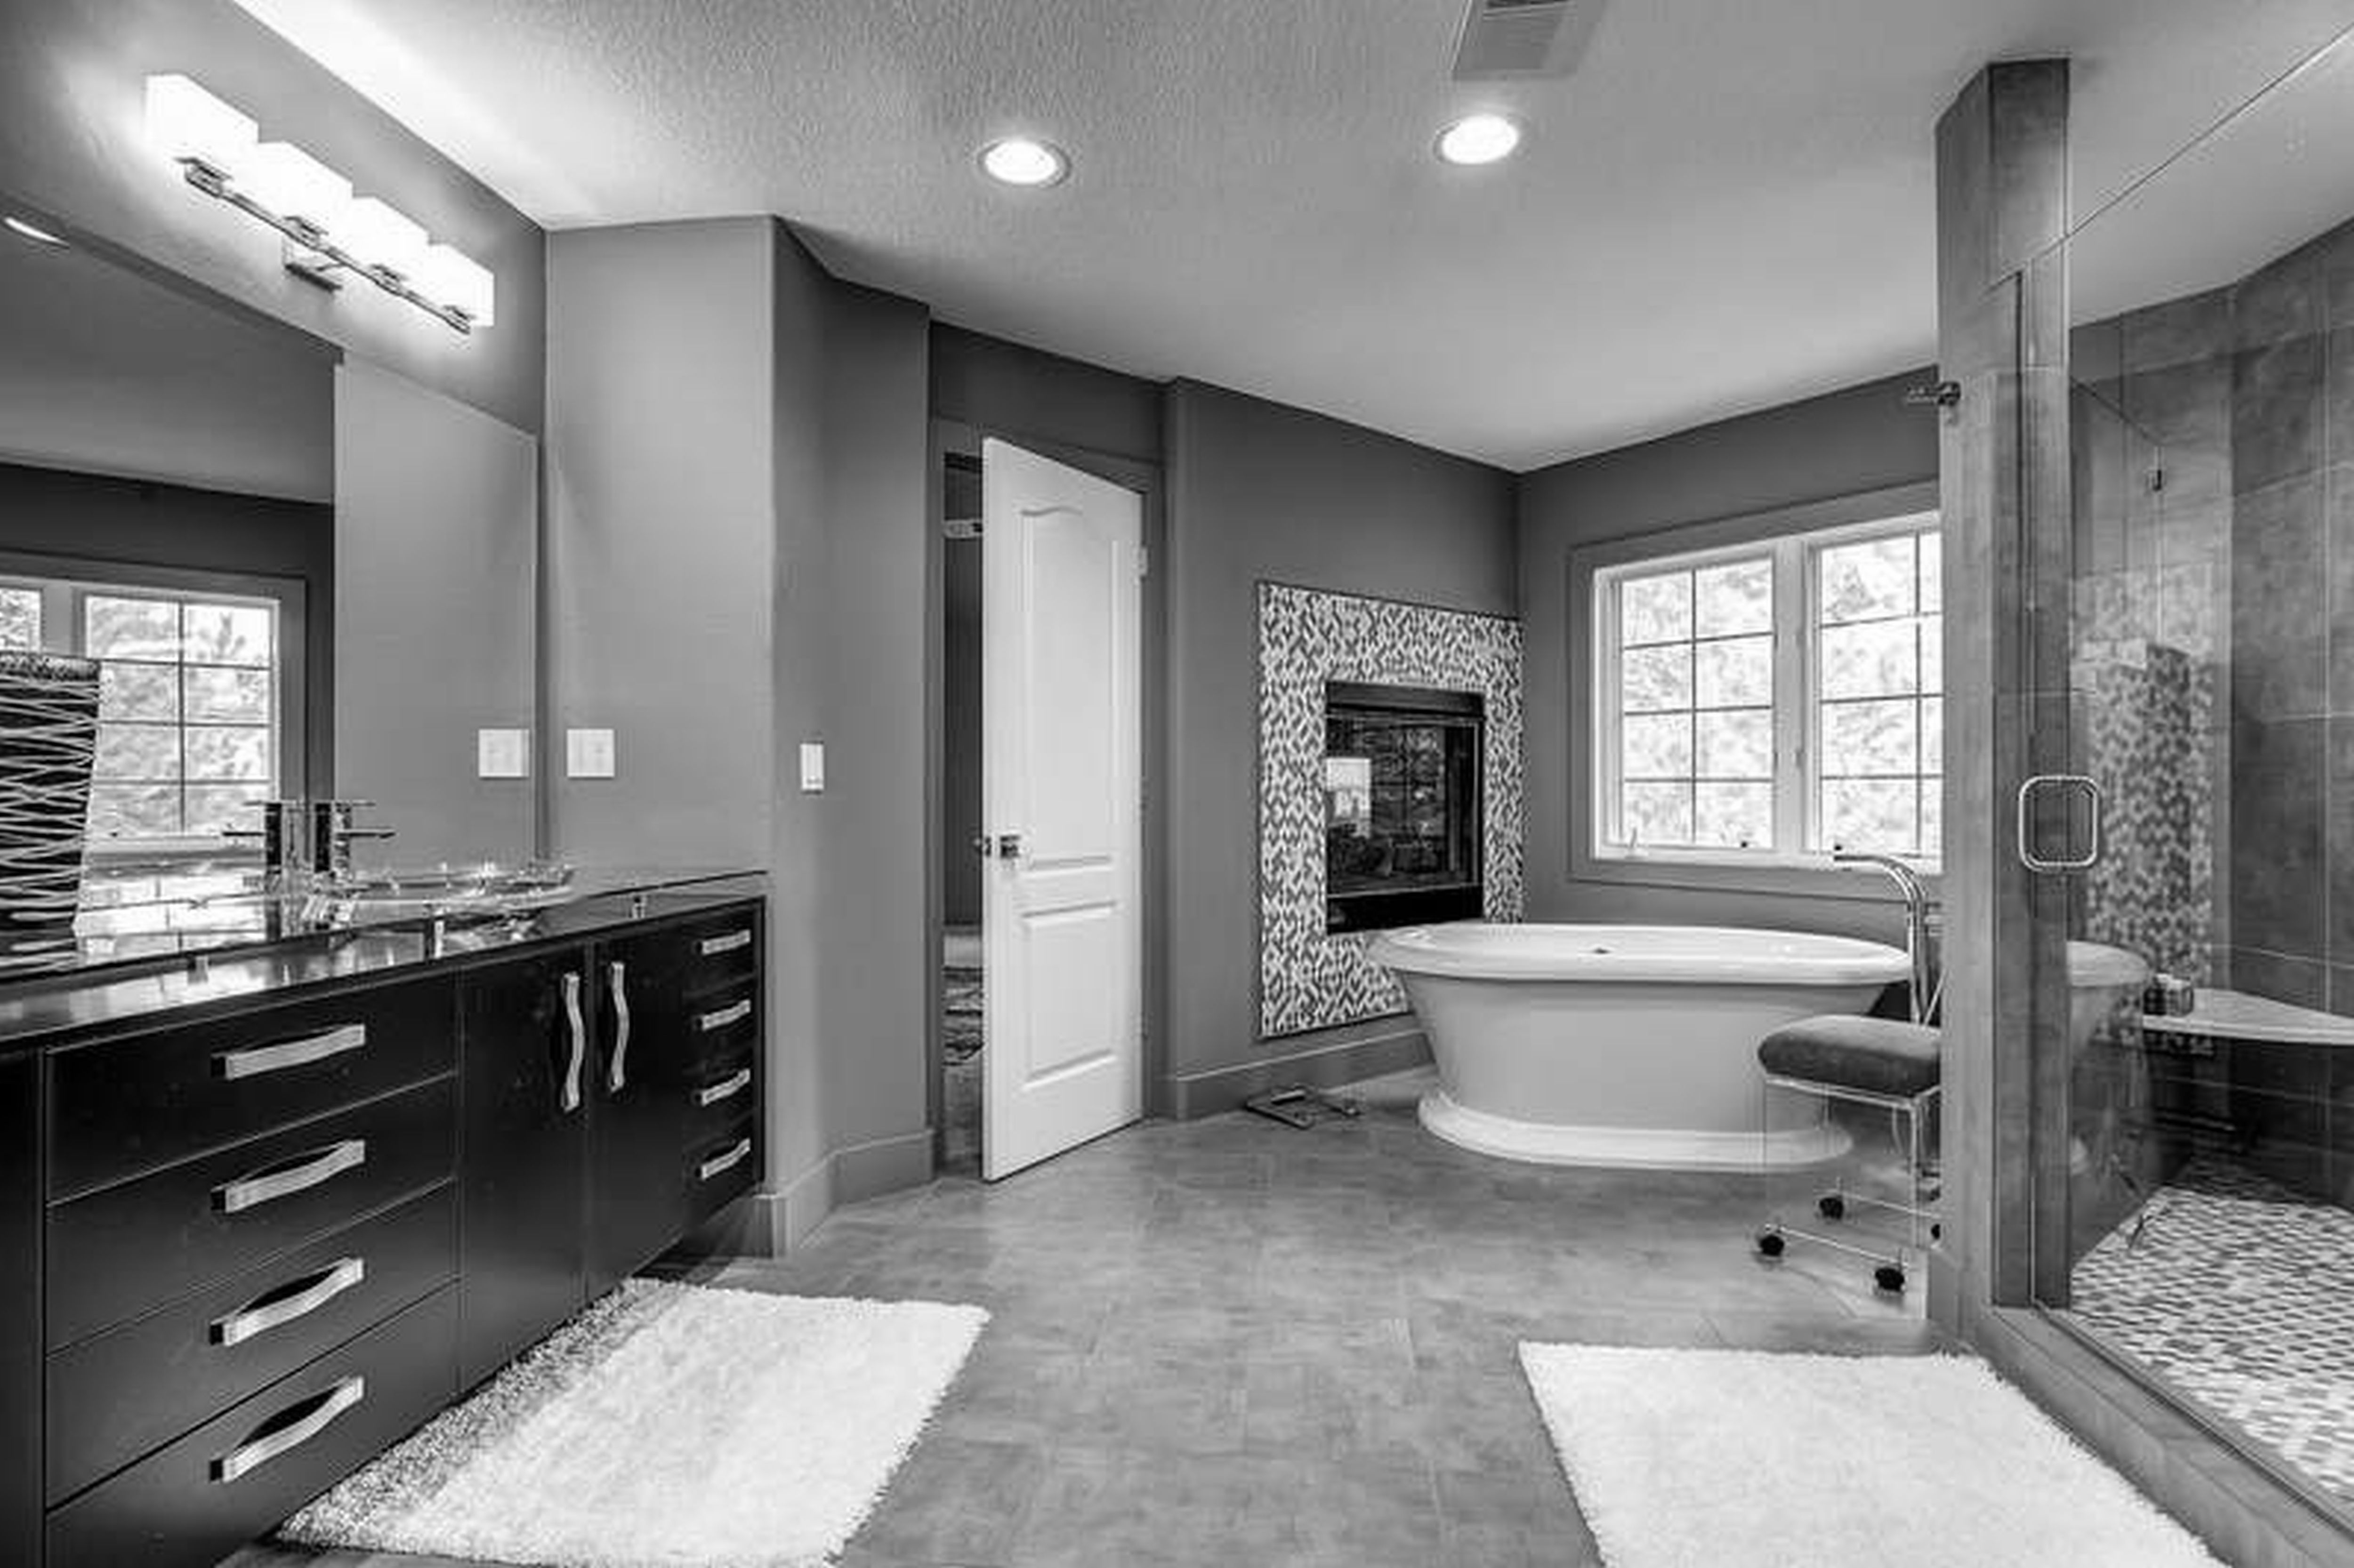 bathroom-black-wooden-bathroom-vanity-and-large-mirror-on-grey-wall-connected-by-white-bathtub-on-grey-tile-floor-bathroom-decorating-ideas-black-and-white-make-your-bathroom-look-contempor